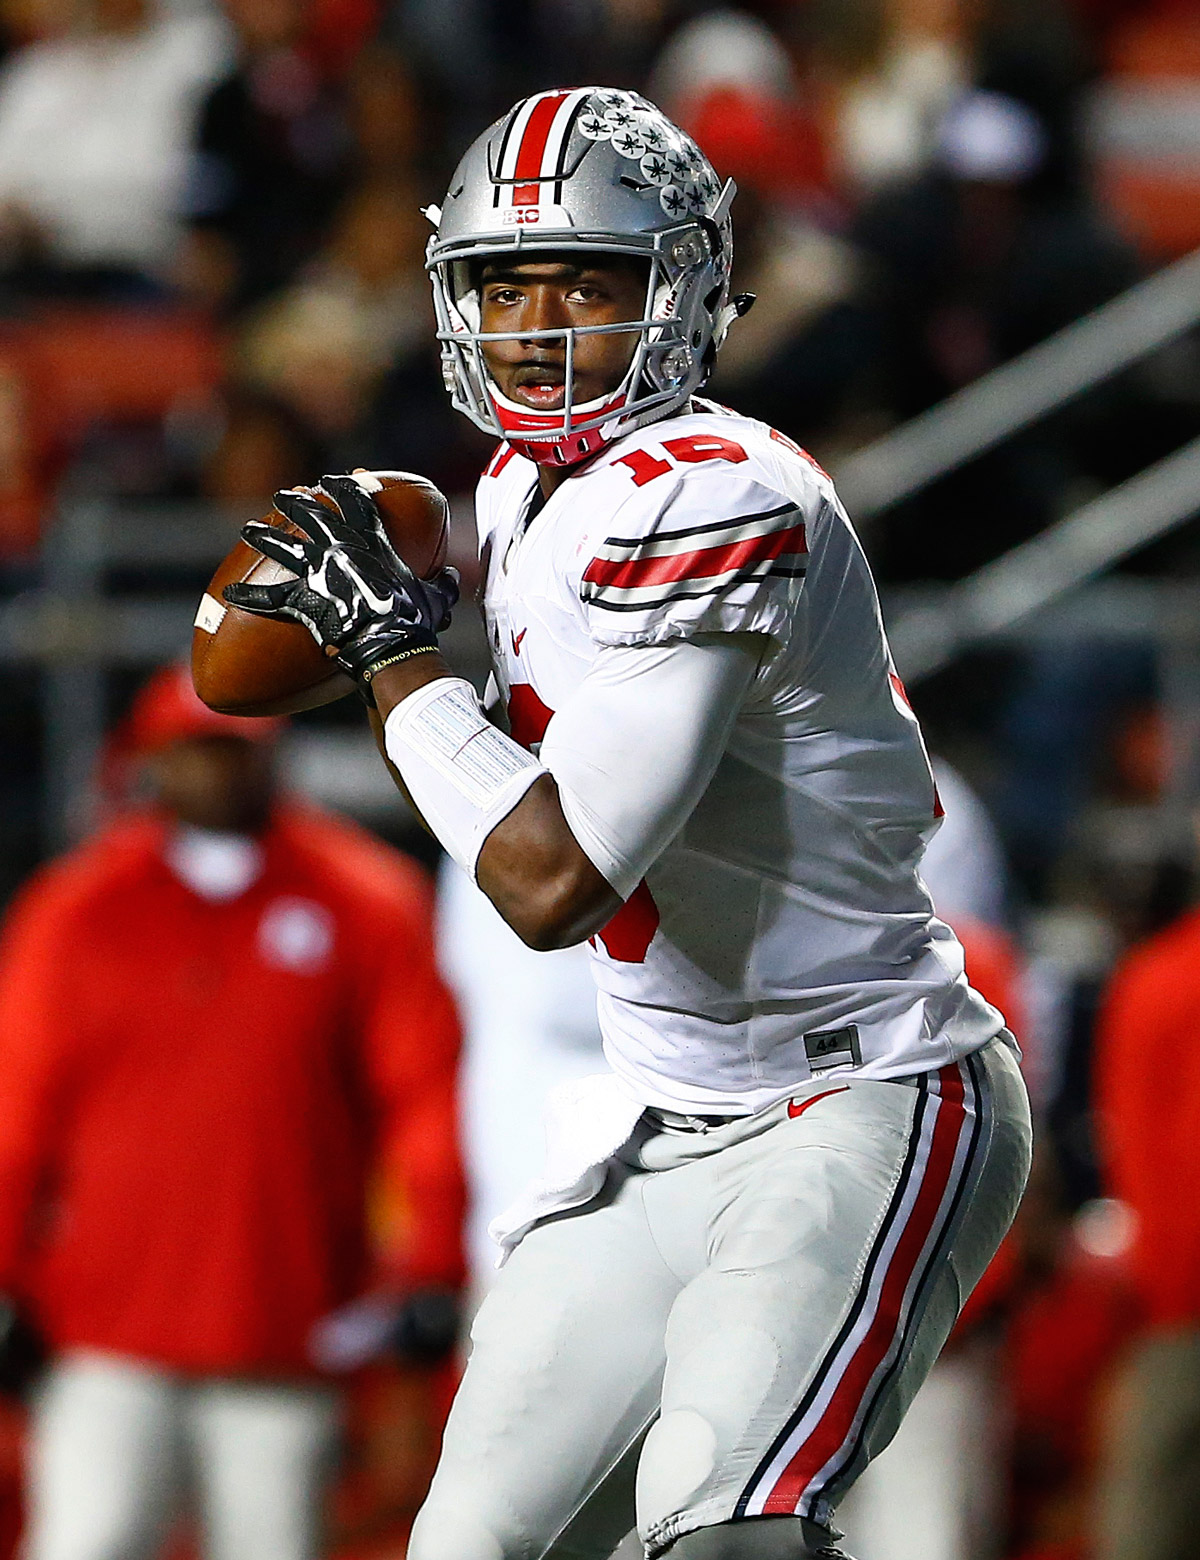 PISCATAWAY, NJ - OCTOBER 24: Quarterback J.T. Barrett #16 of the Ohio State Buckeyes in action against the Rutgers Scarlet Knights during a game at High Point Solutions Stadium on October 24, 2015 in Piscataway, New Jersey. (Photo by Rich Schultz /Getty Images)